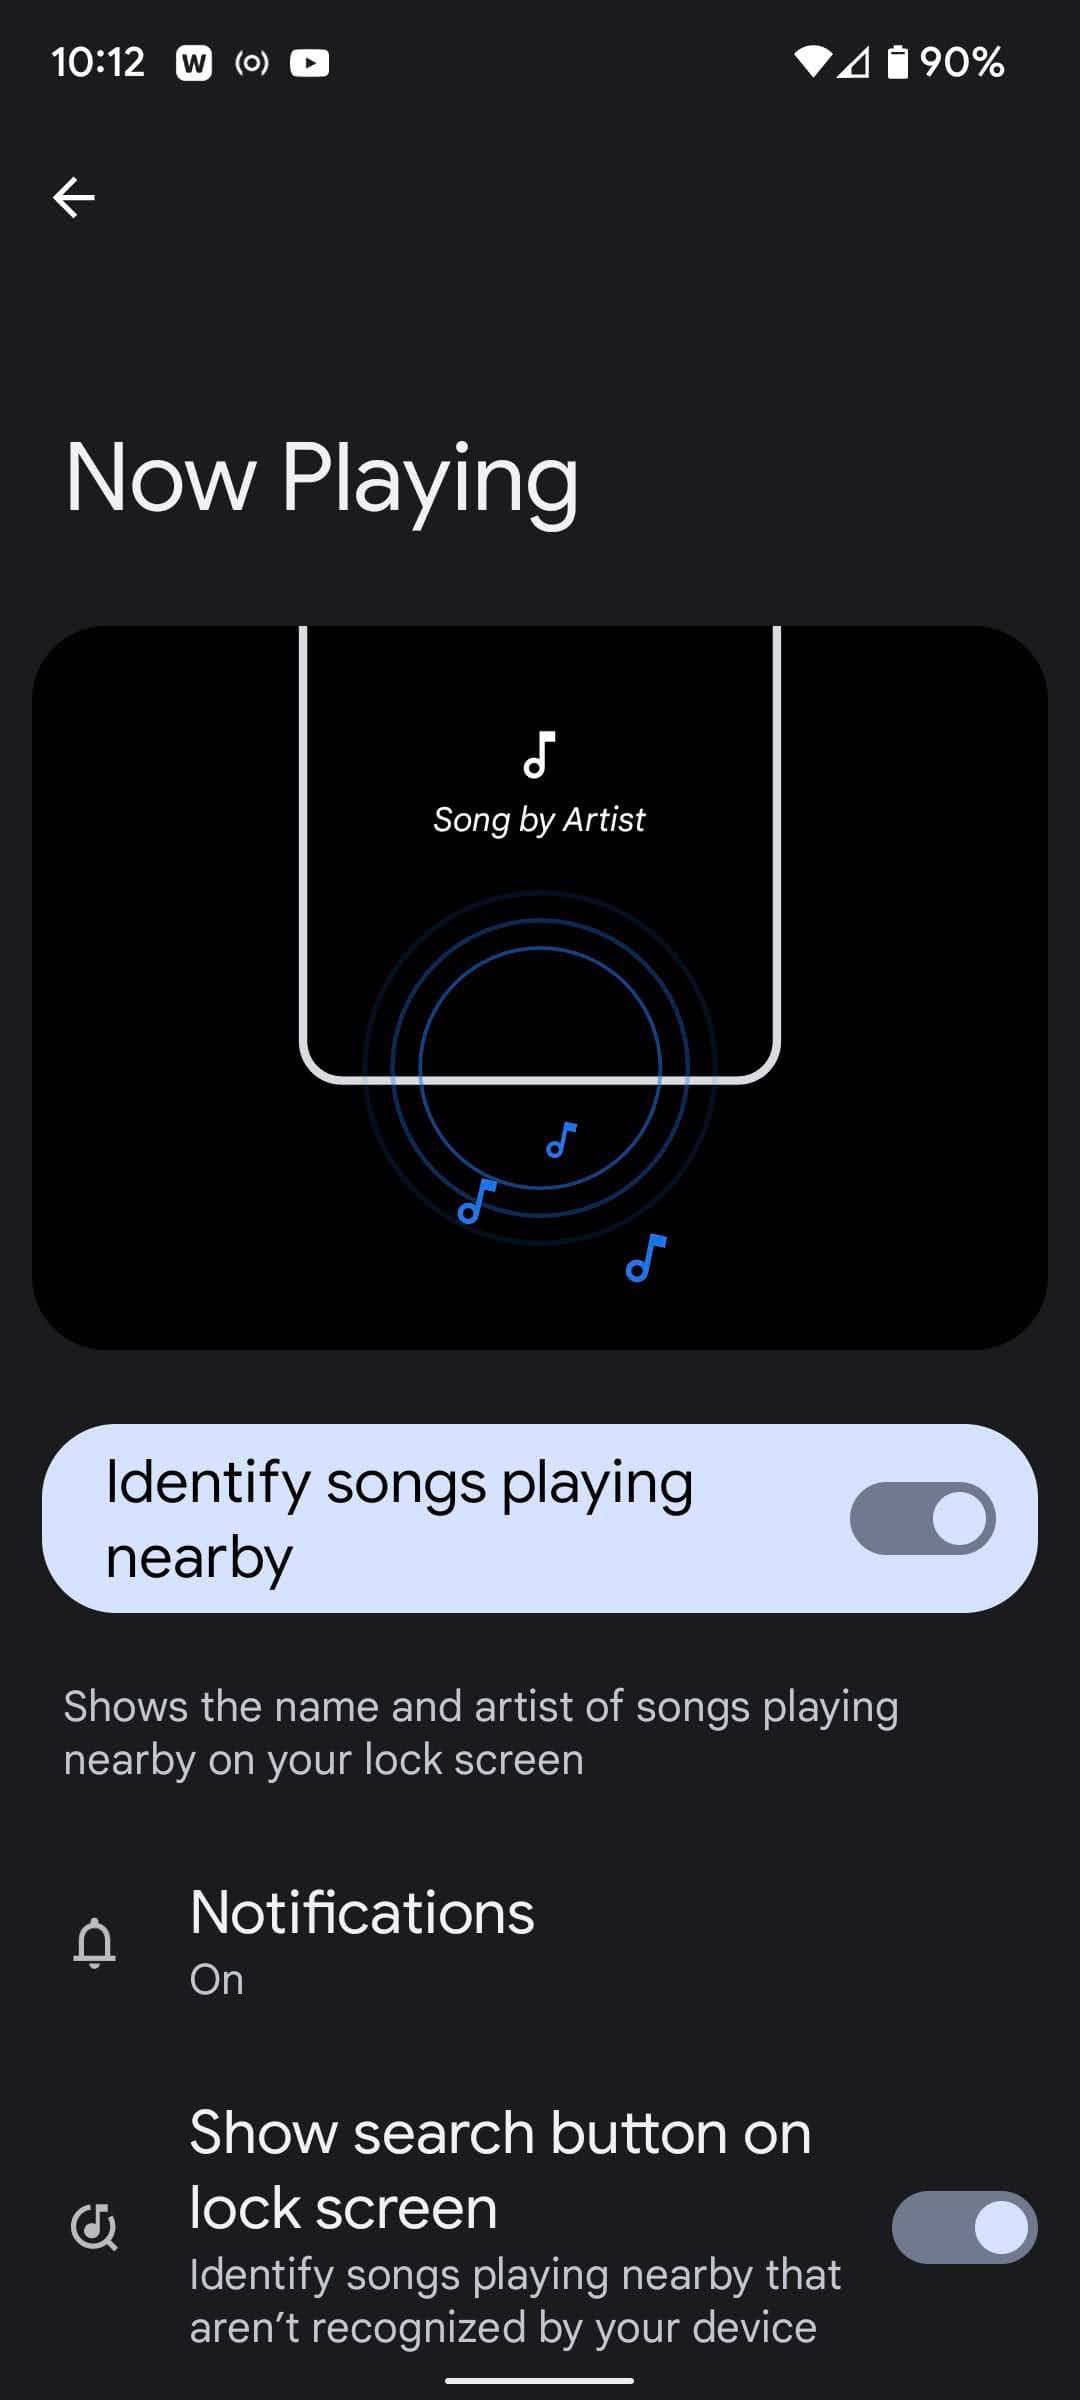 Toggle on “Identify songs playing nearby”